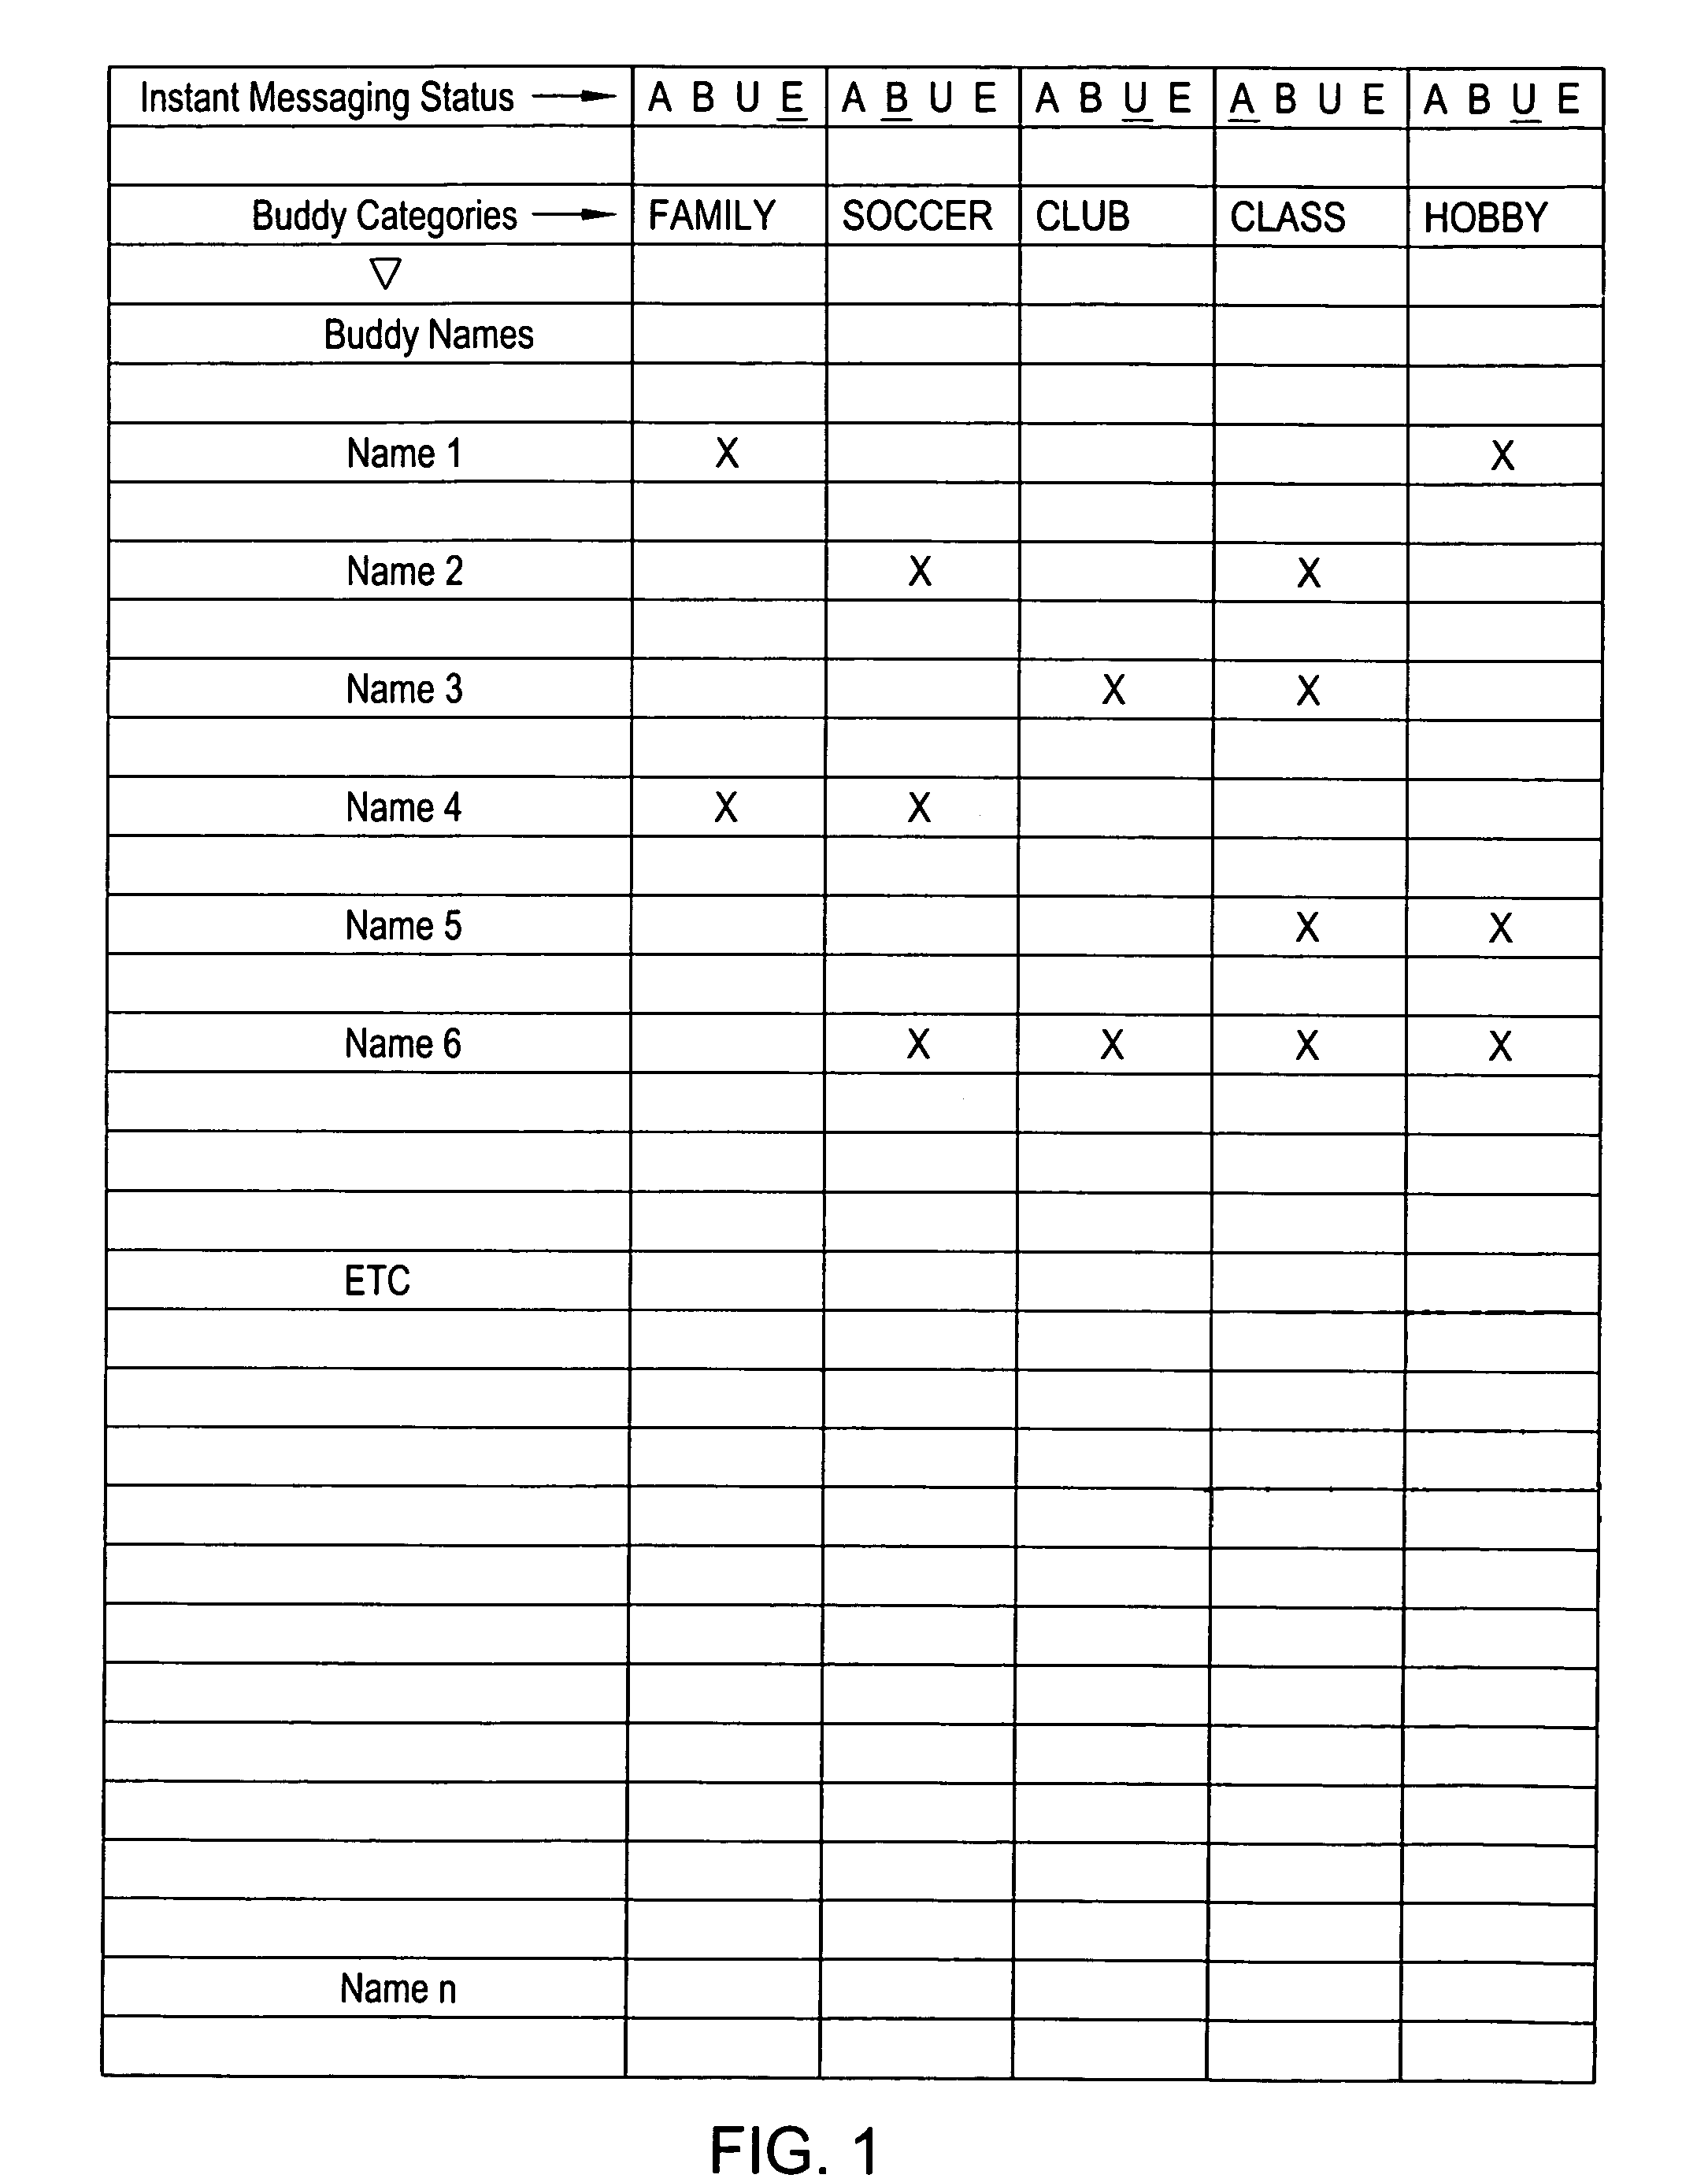 Method of authorizing receipt of instant messages by a recipient user